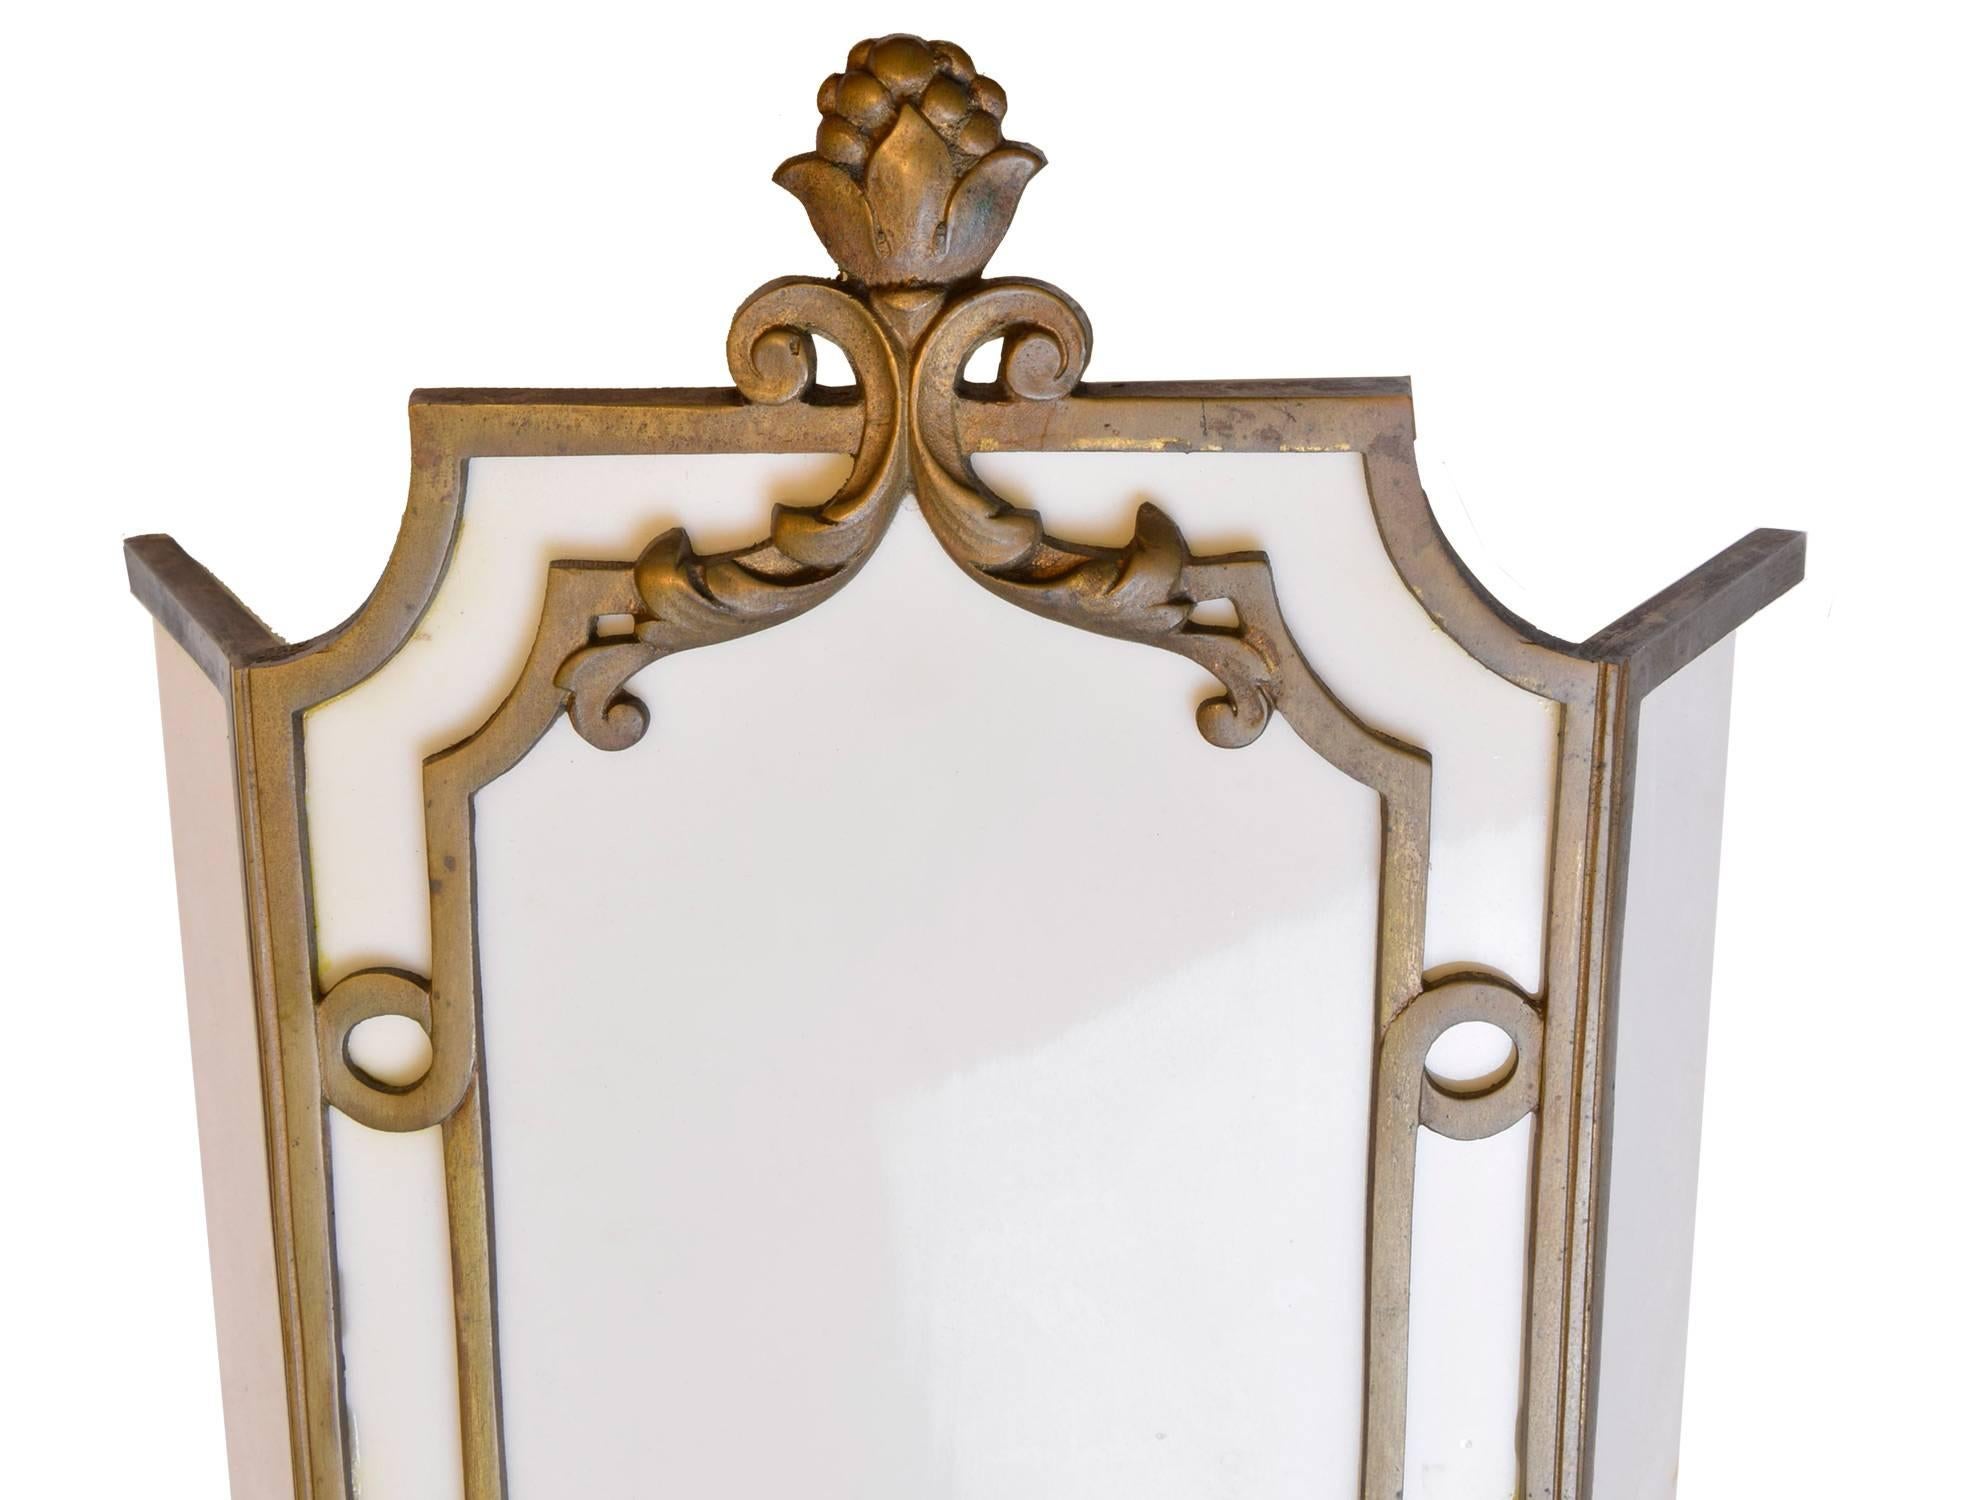 This pair of cast bronze sconces have elegant details from the 1920s and create a lovely effect when illumated on a wall. Milk glass warms with a rich glow, creating a silhouette of the beaux art design. Created by the sterling bronze Co. New York,